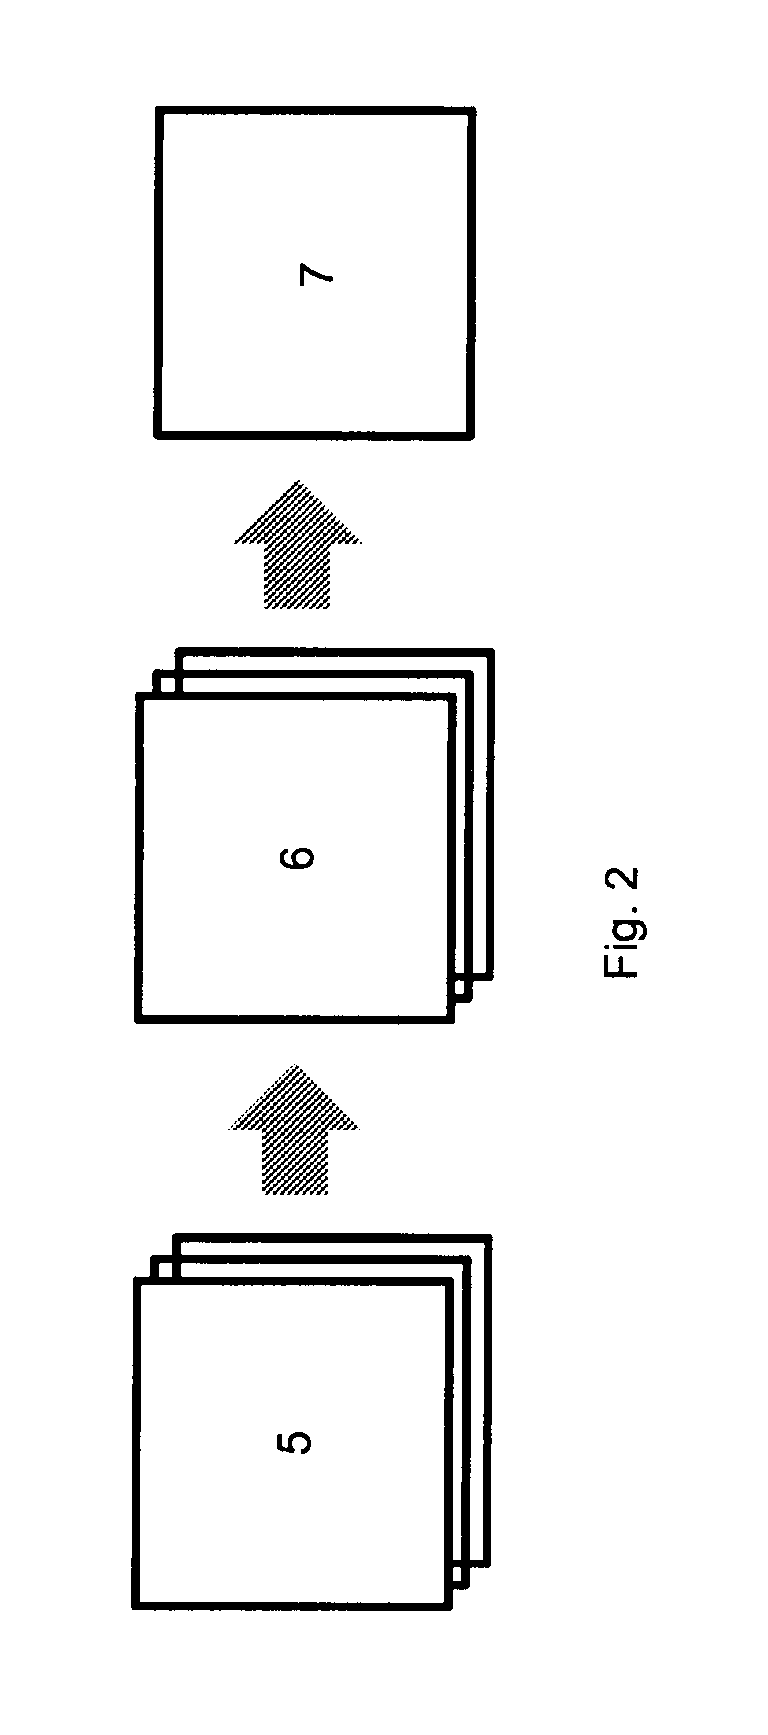 Method for representing a vehicle environment with position points